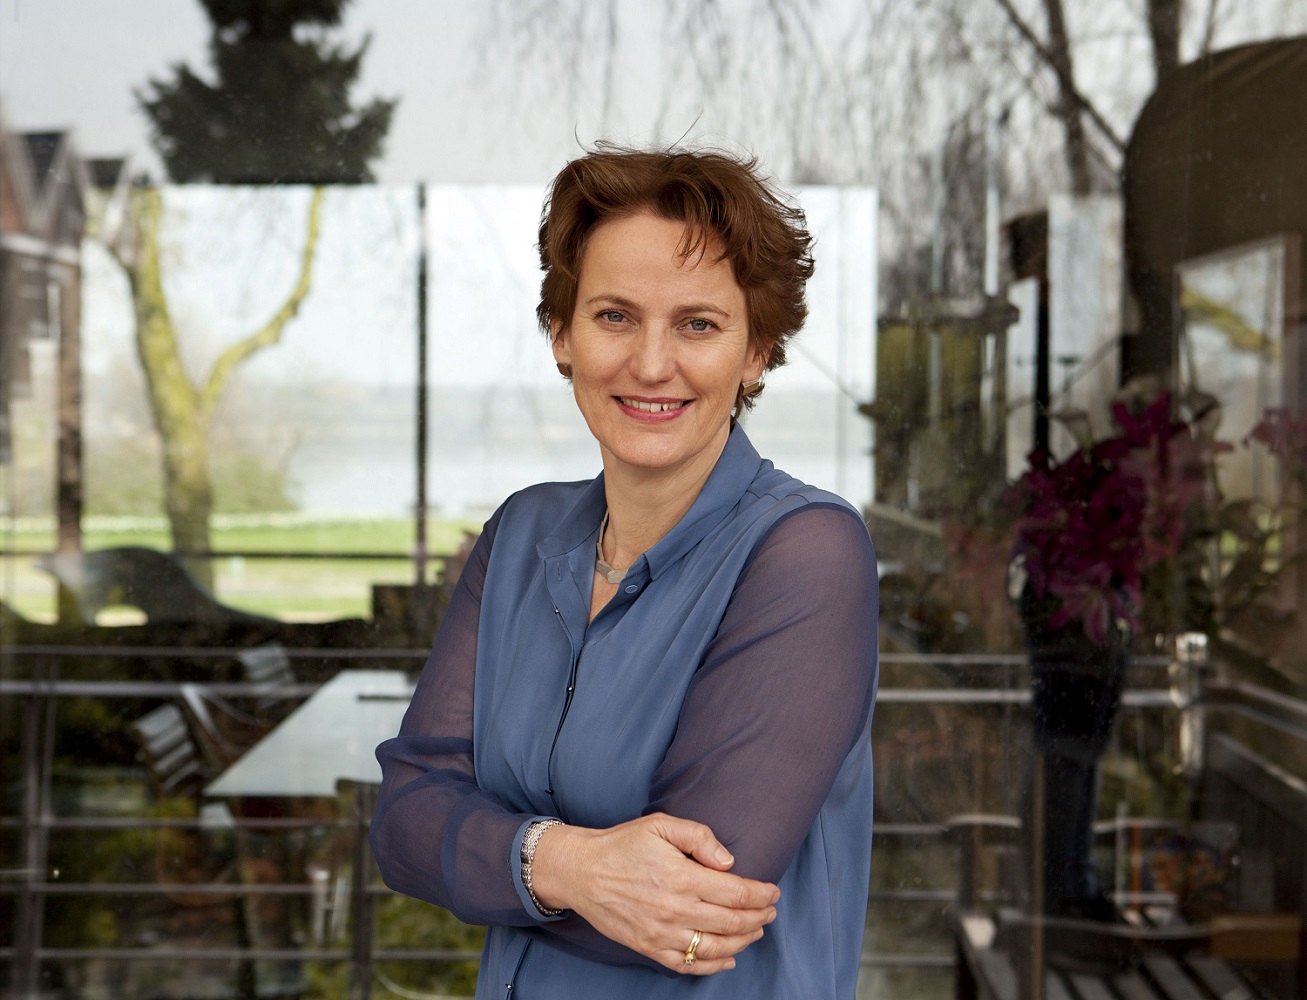 This is a headshot image of Francine Houben